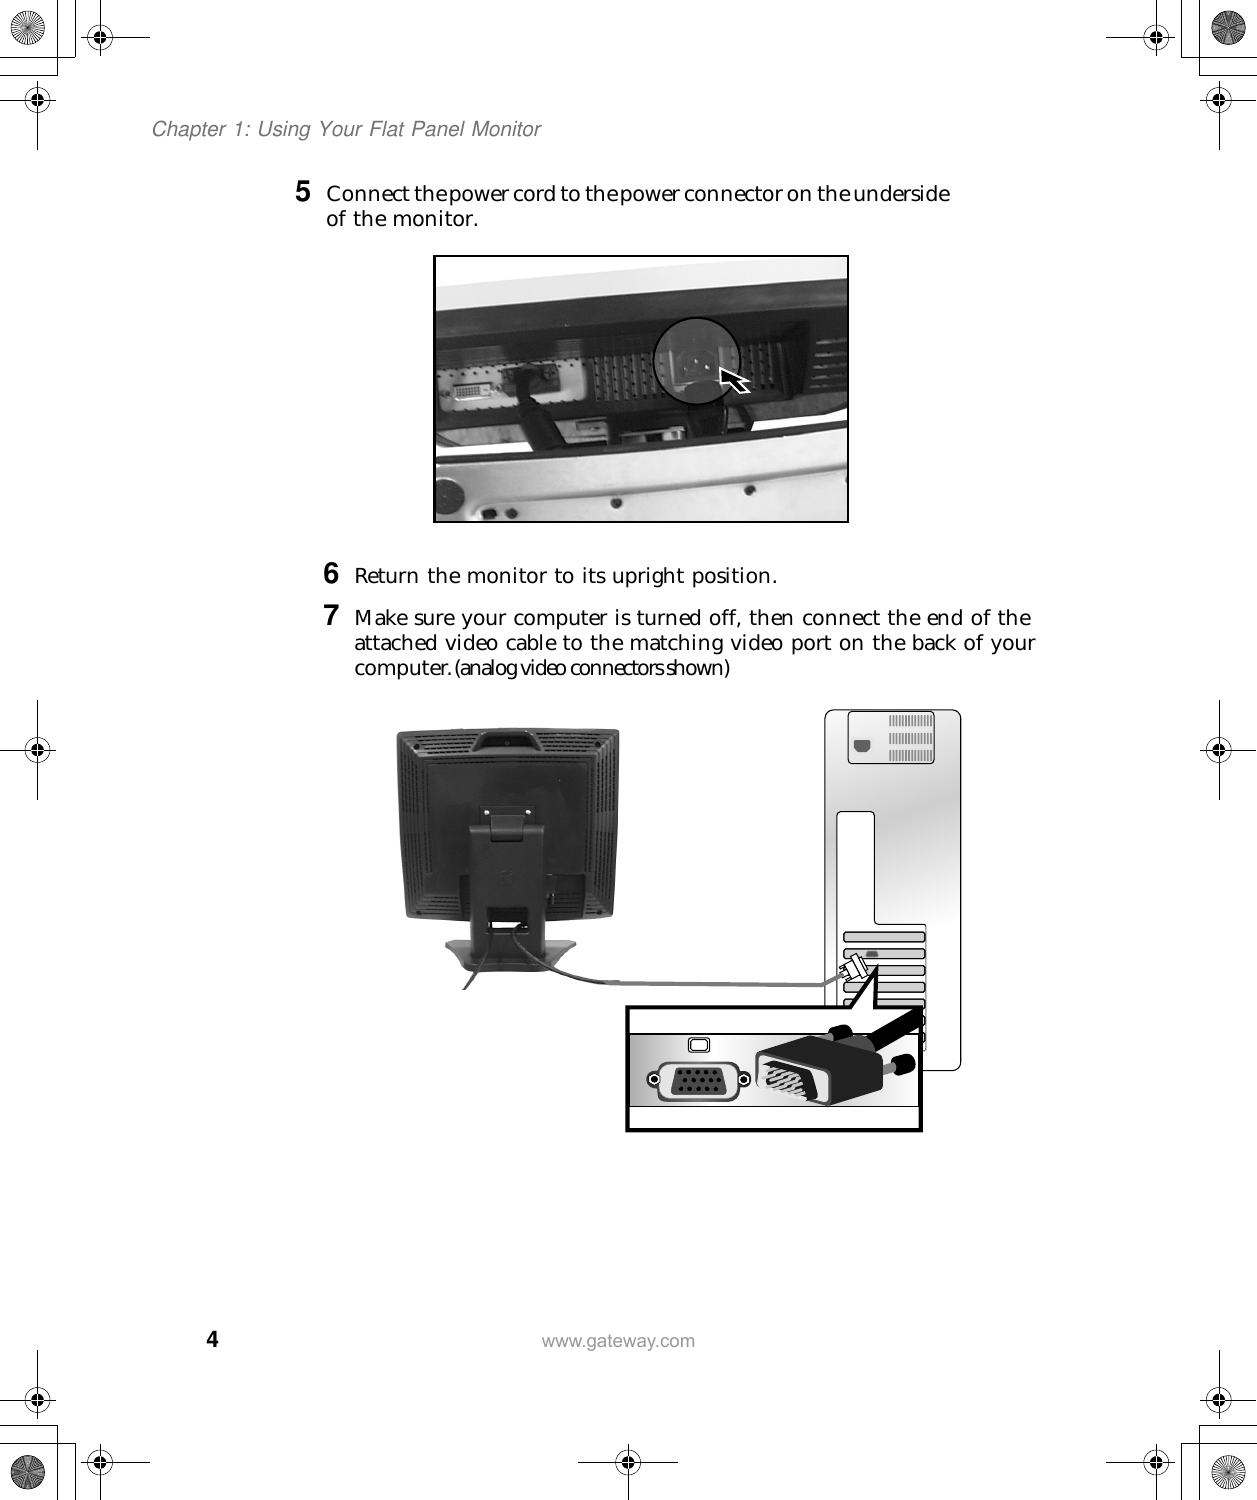 4Chapter 1: Using Your Flat Panel Monitorwww.gateway.com5 Connect the  power cord to the  power connector on the underside of the monitor.6 Return the monitor to its upright position.7 Make sure your computer is turned off, then connect the end of the attached video cable to the matching video port on the back of your computer (analog video connectors shown).